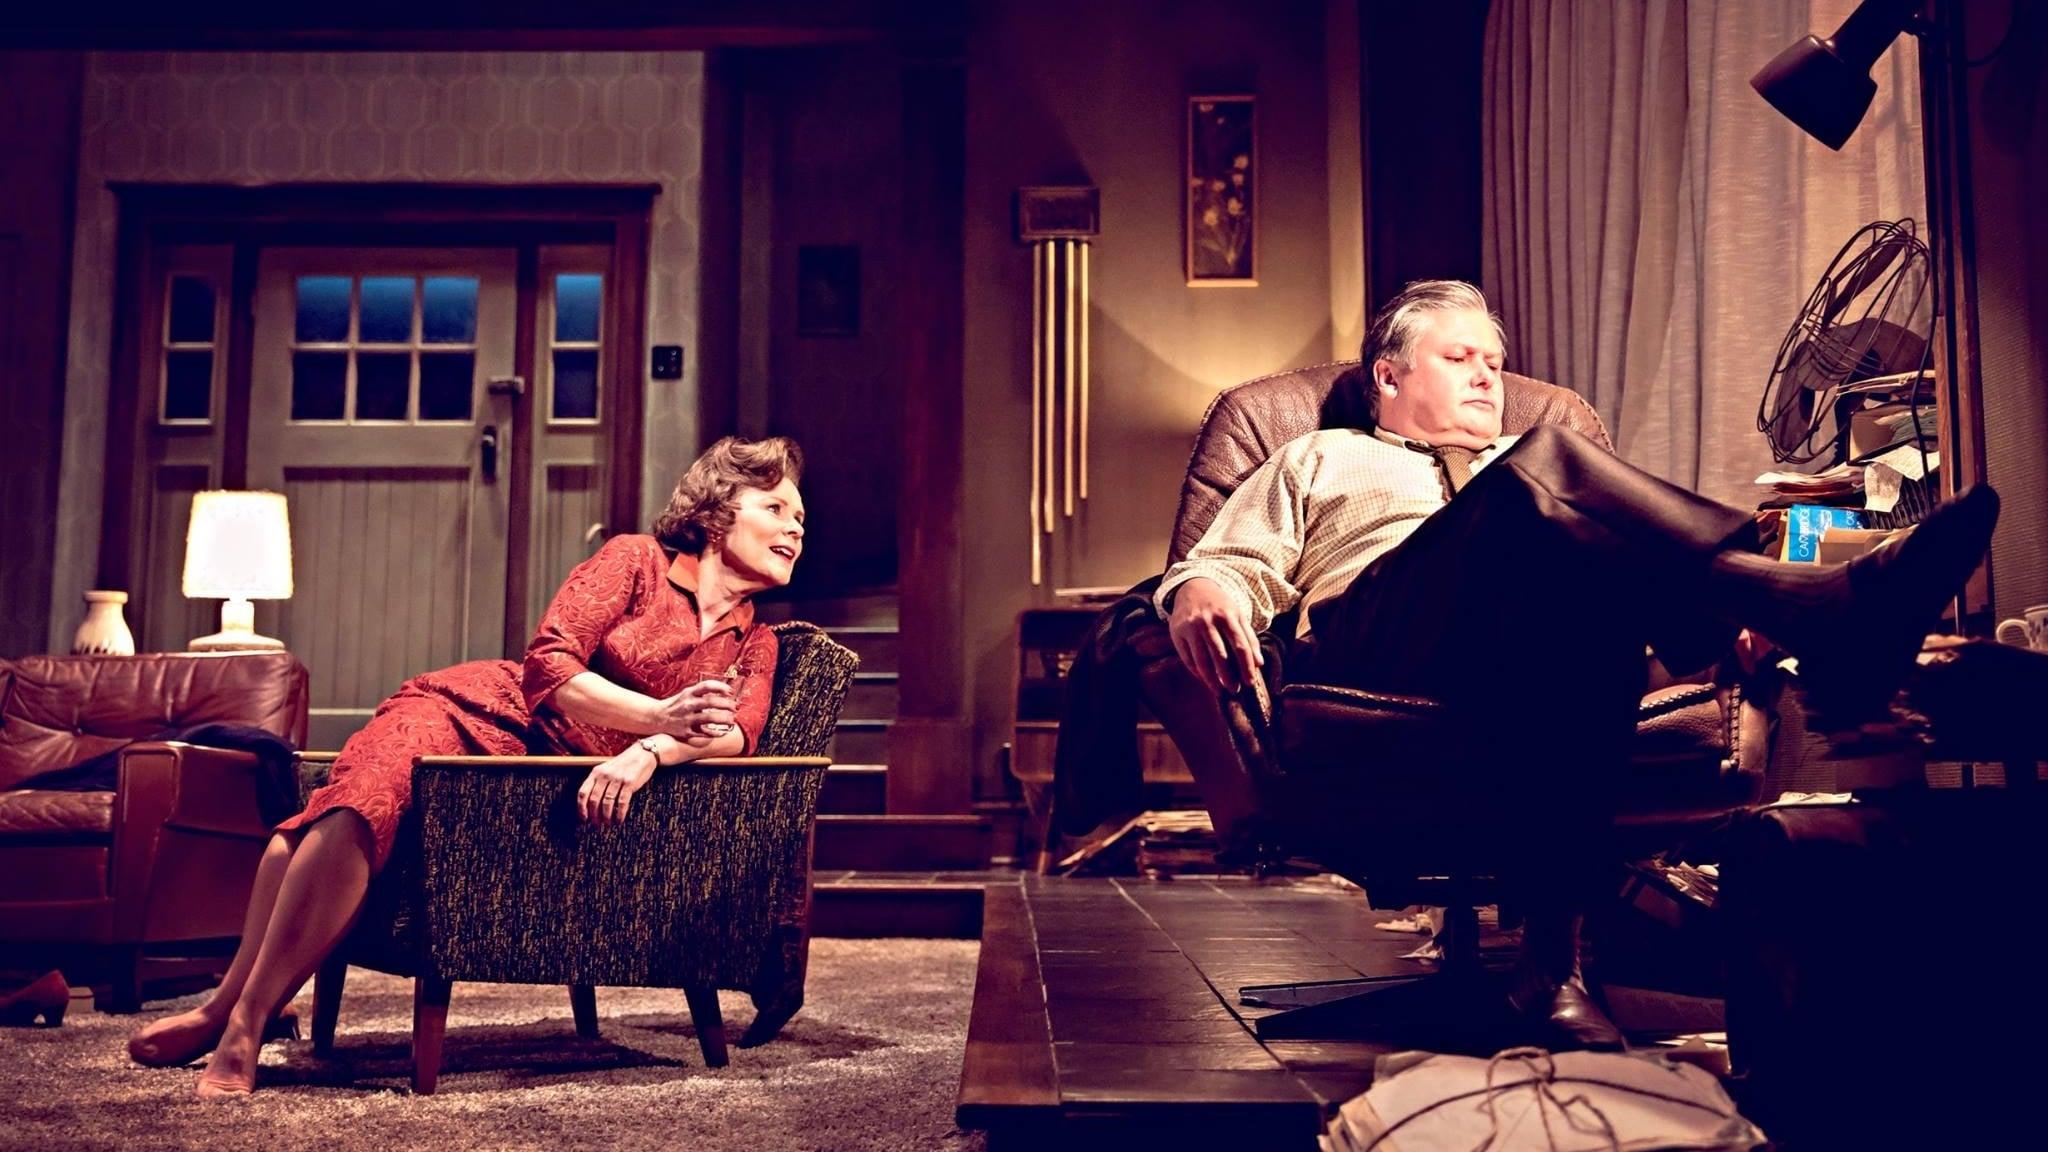 National Theatre Live: Edward Albee's Who's Afraid of Virginia Woolf? backdrop